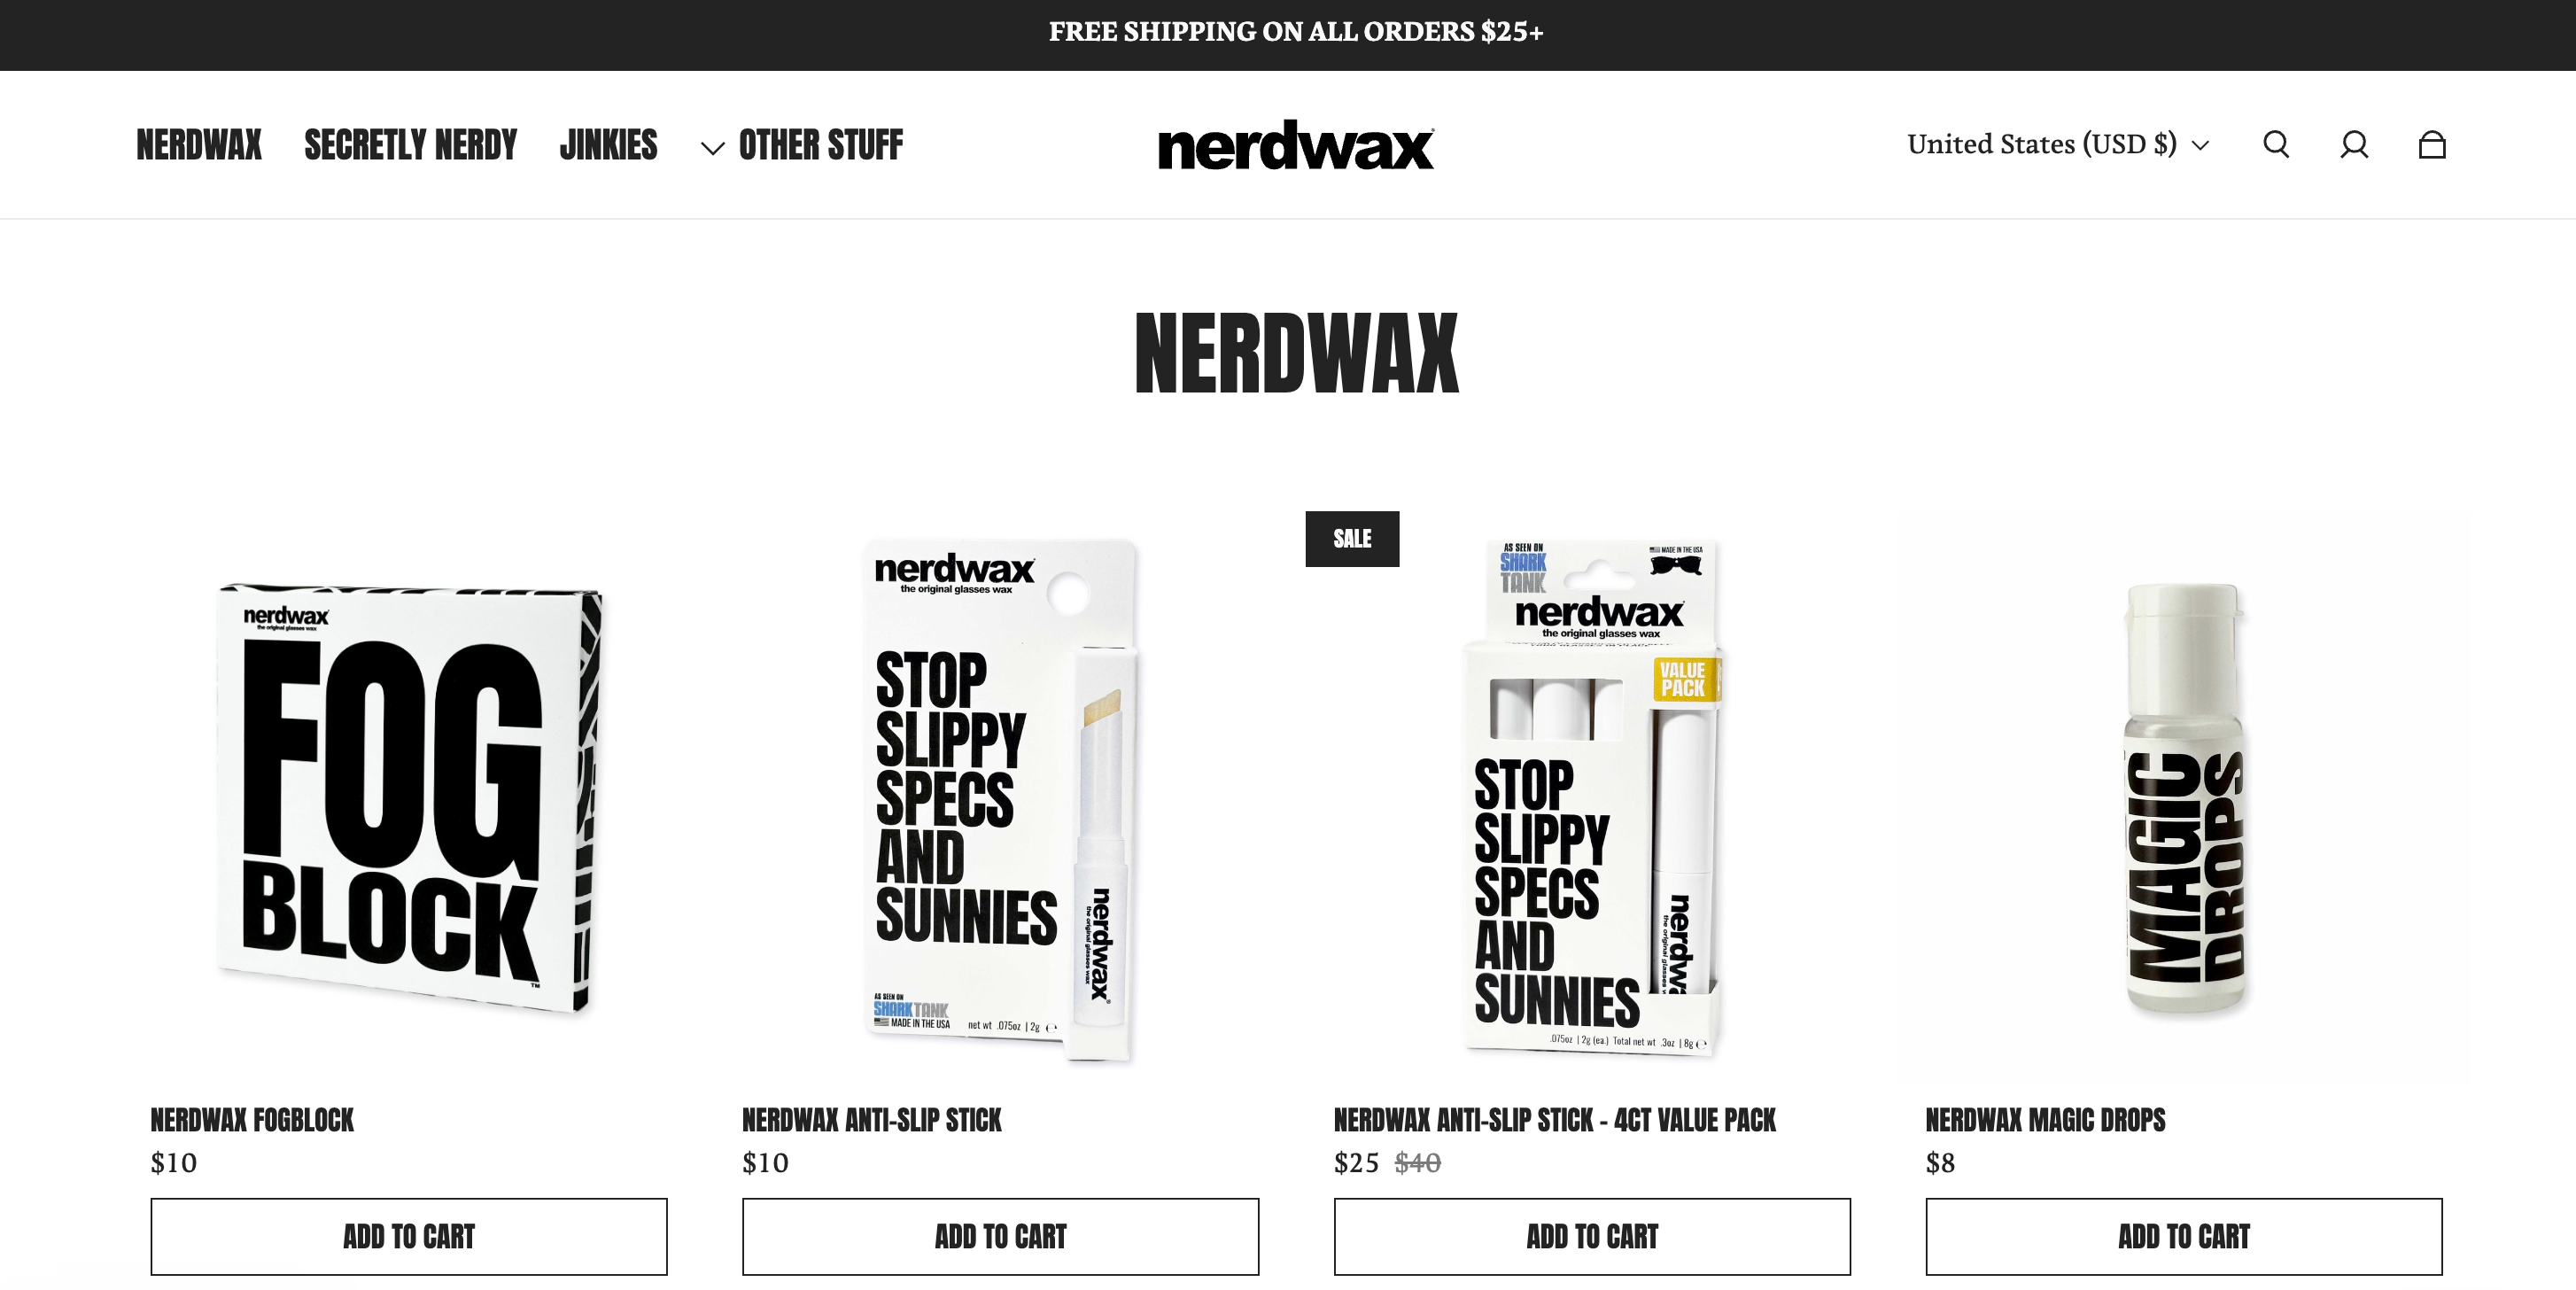 Ecommerce product collection for eyewear accessories brand Nerdwax